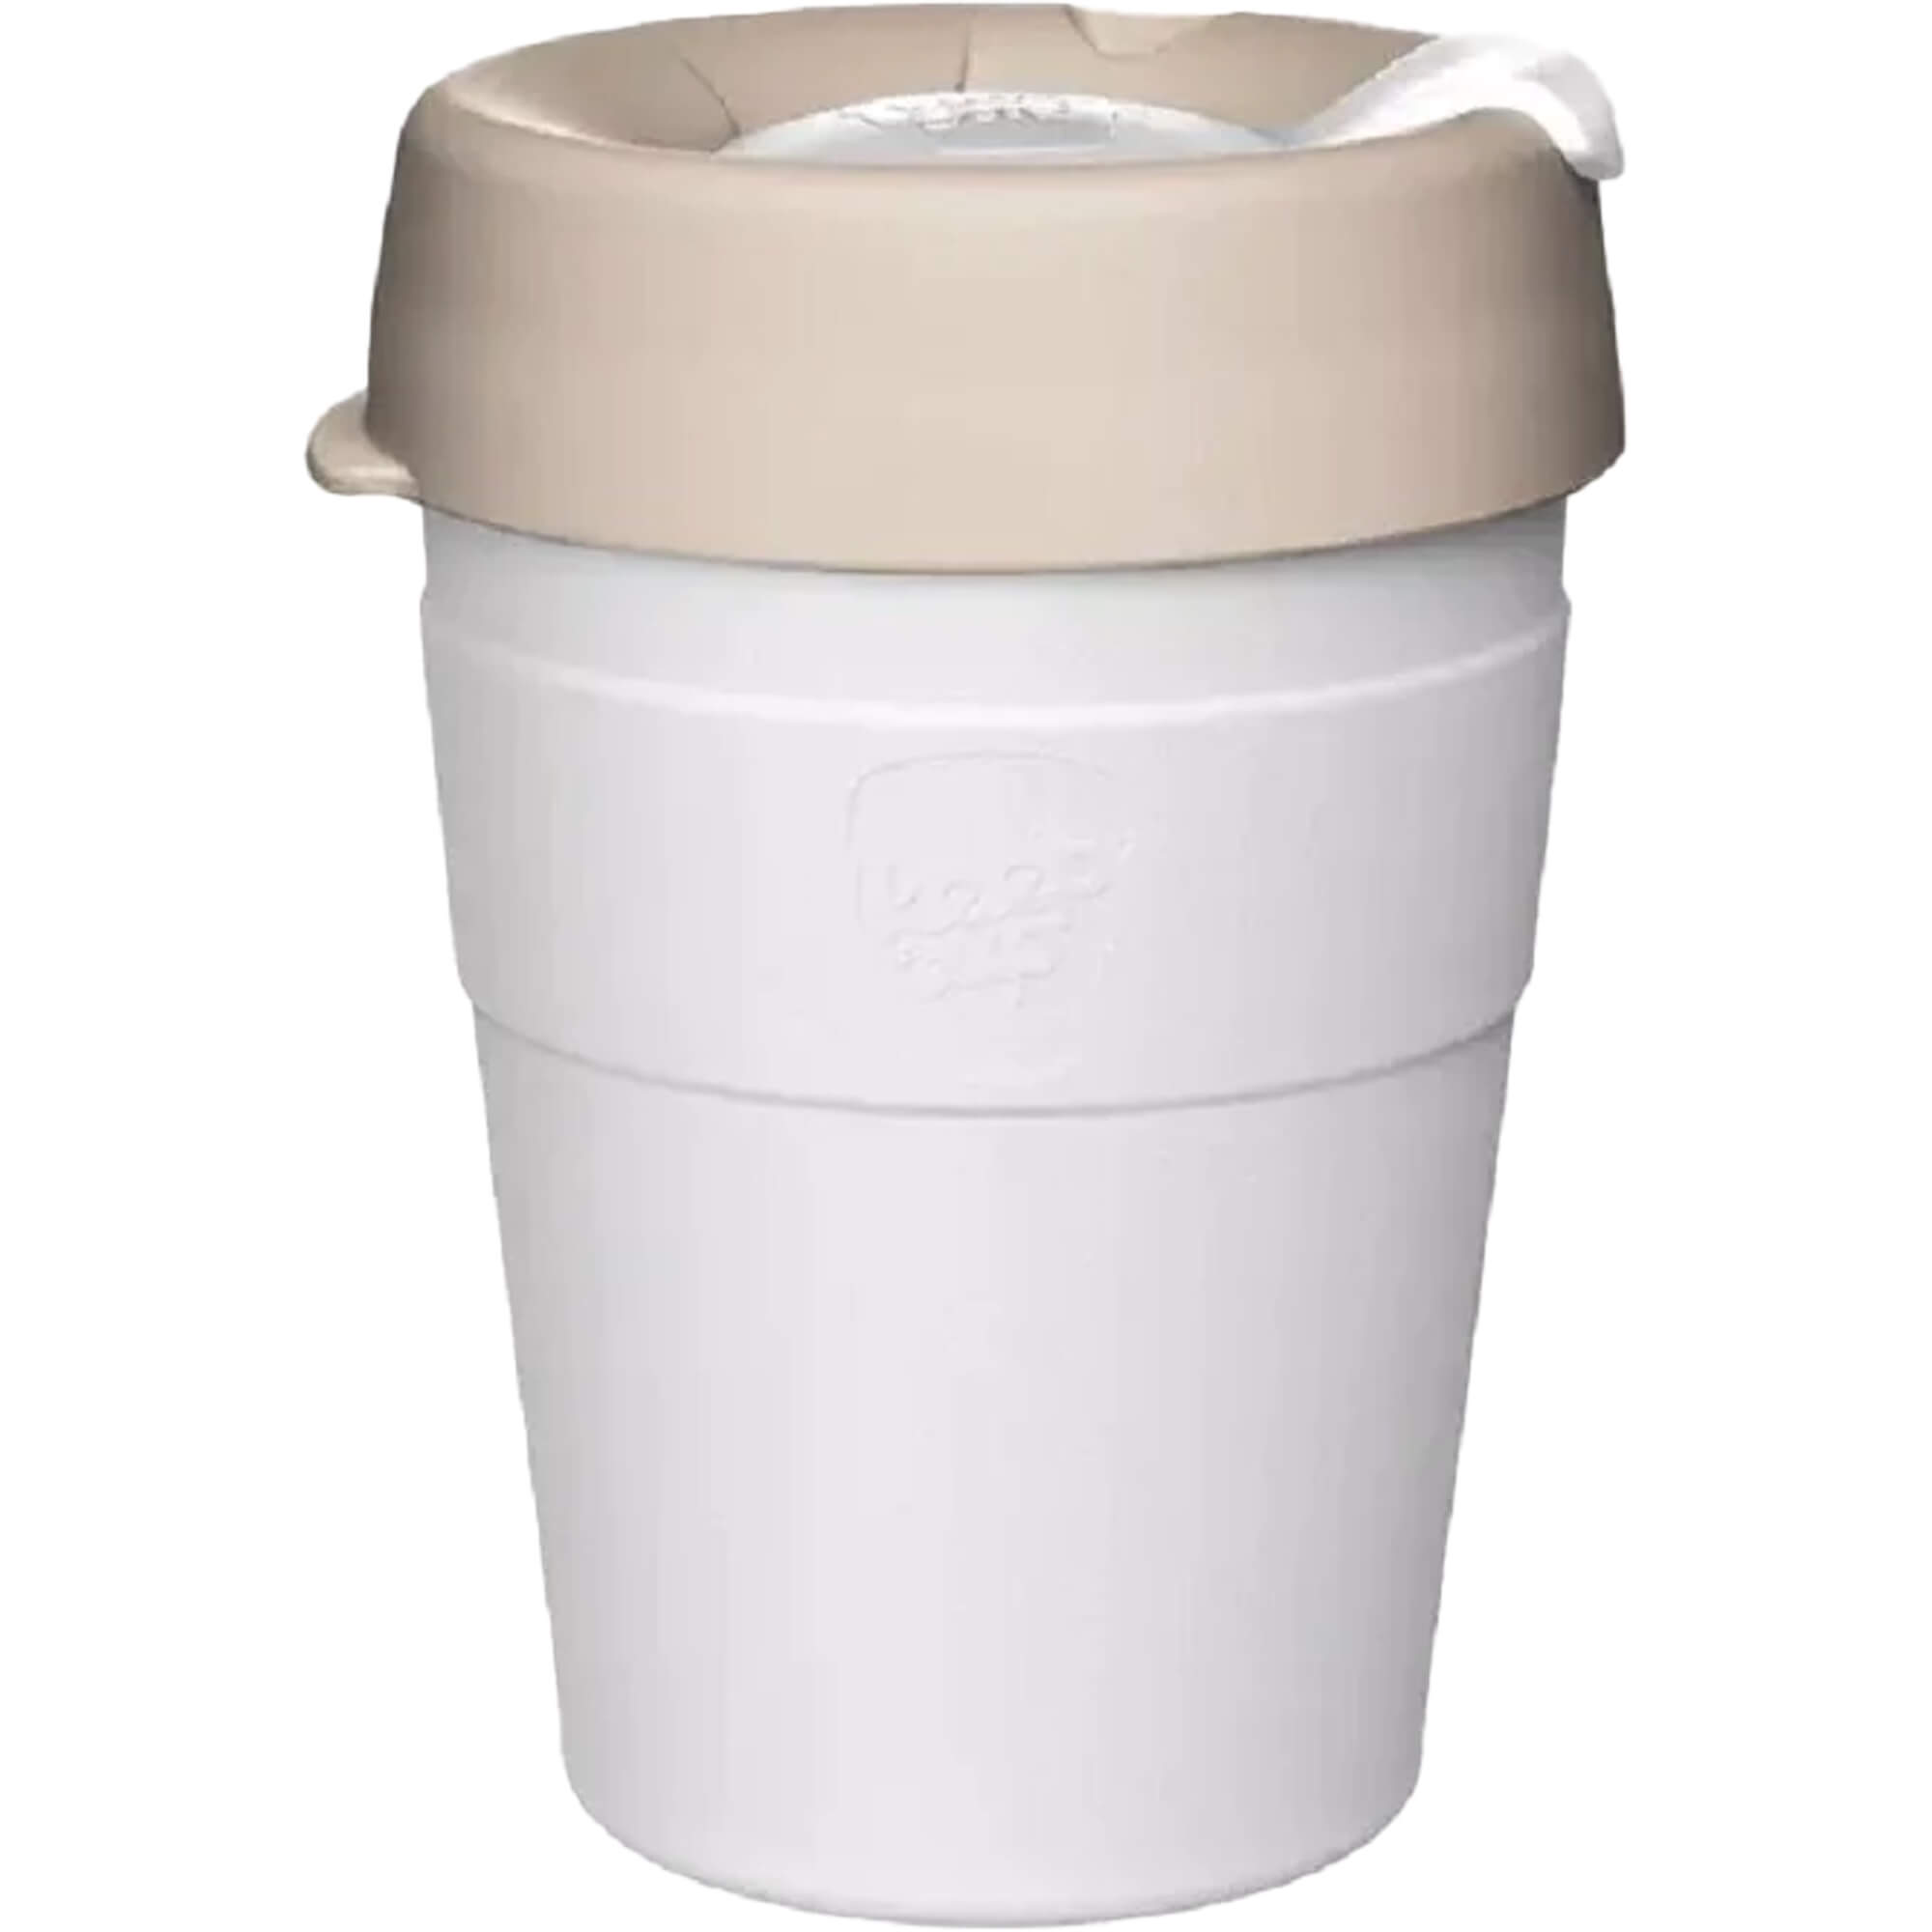 KeepCup Thermal Insulated 340ml Reusable Tea/Coffee Cup